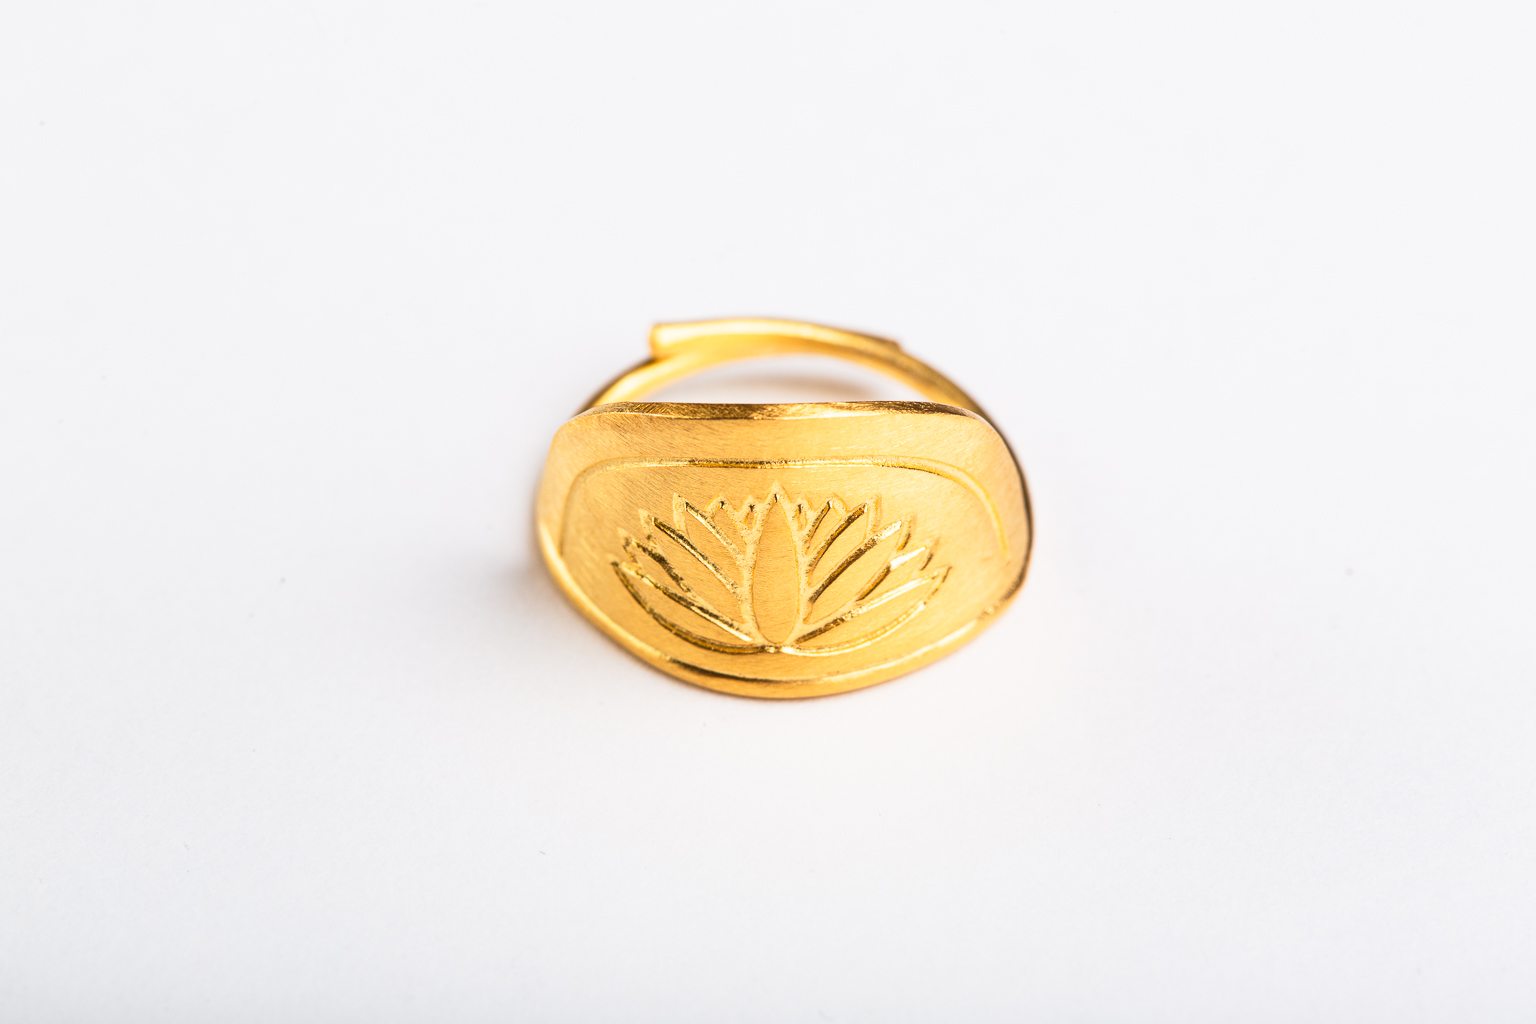 Gold-plated "Lotus" ring